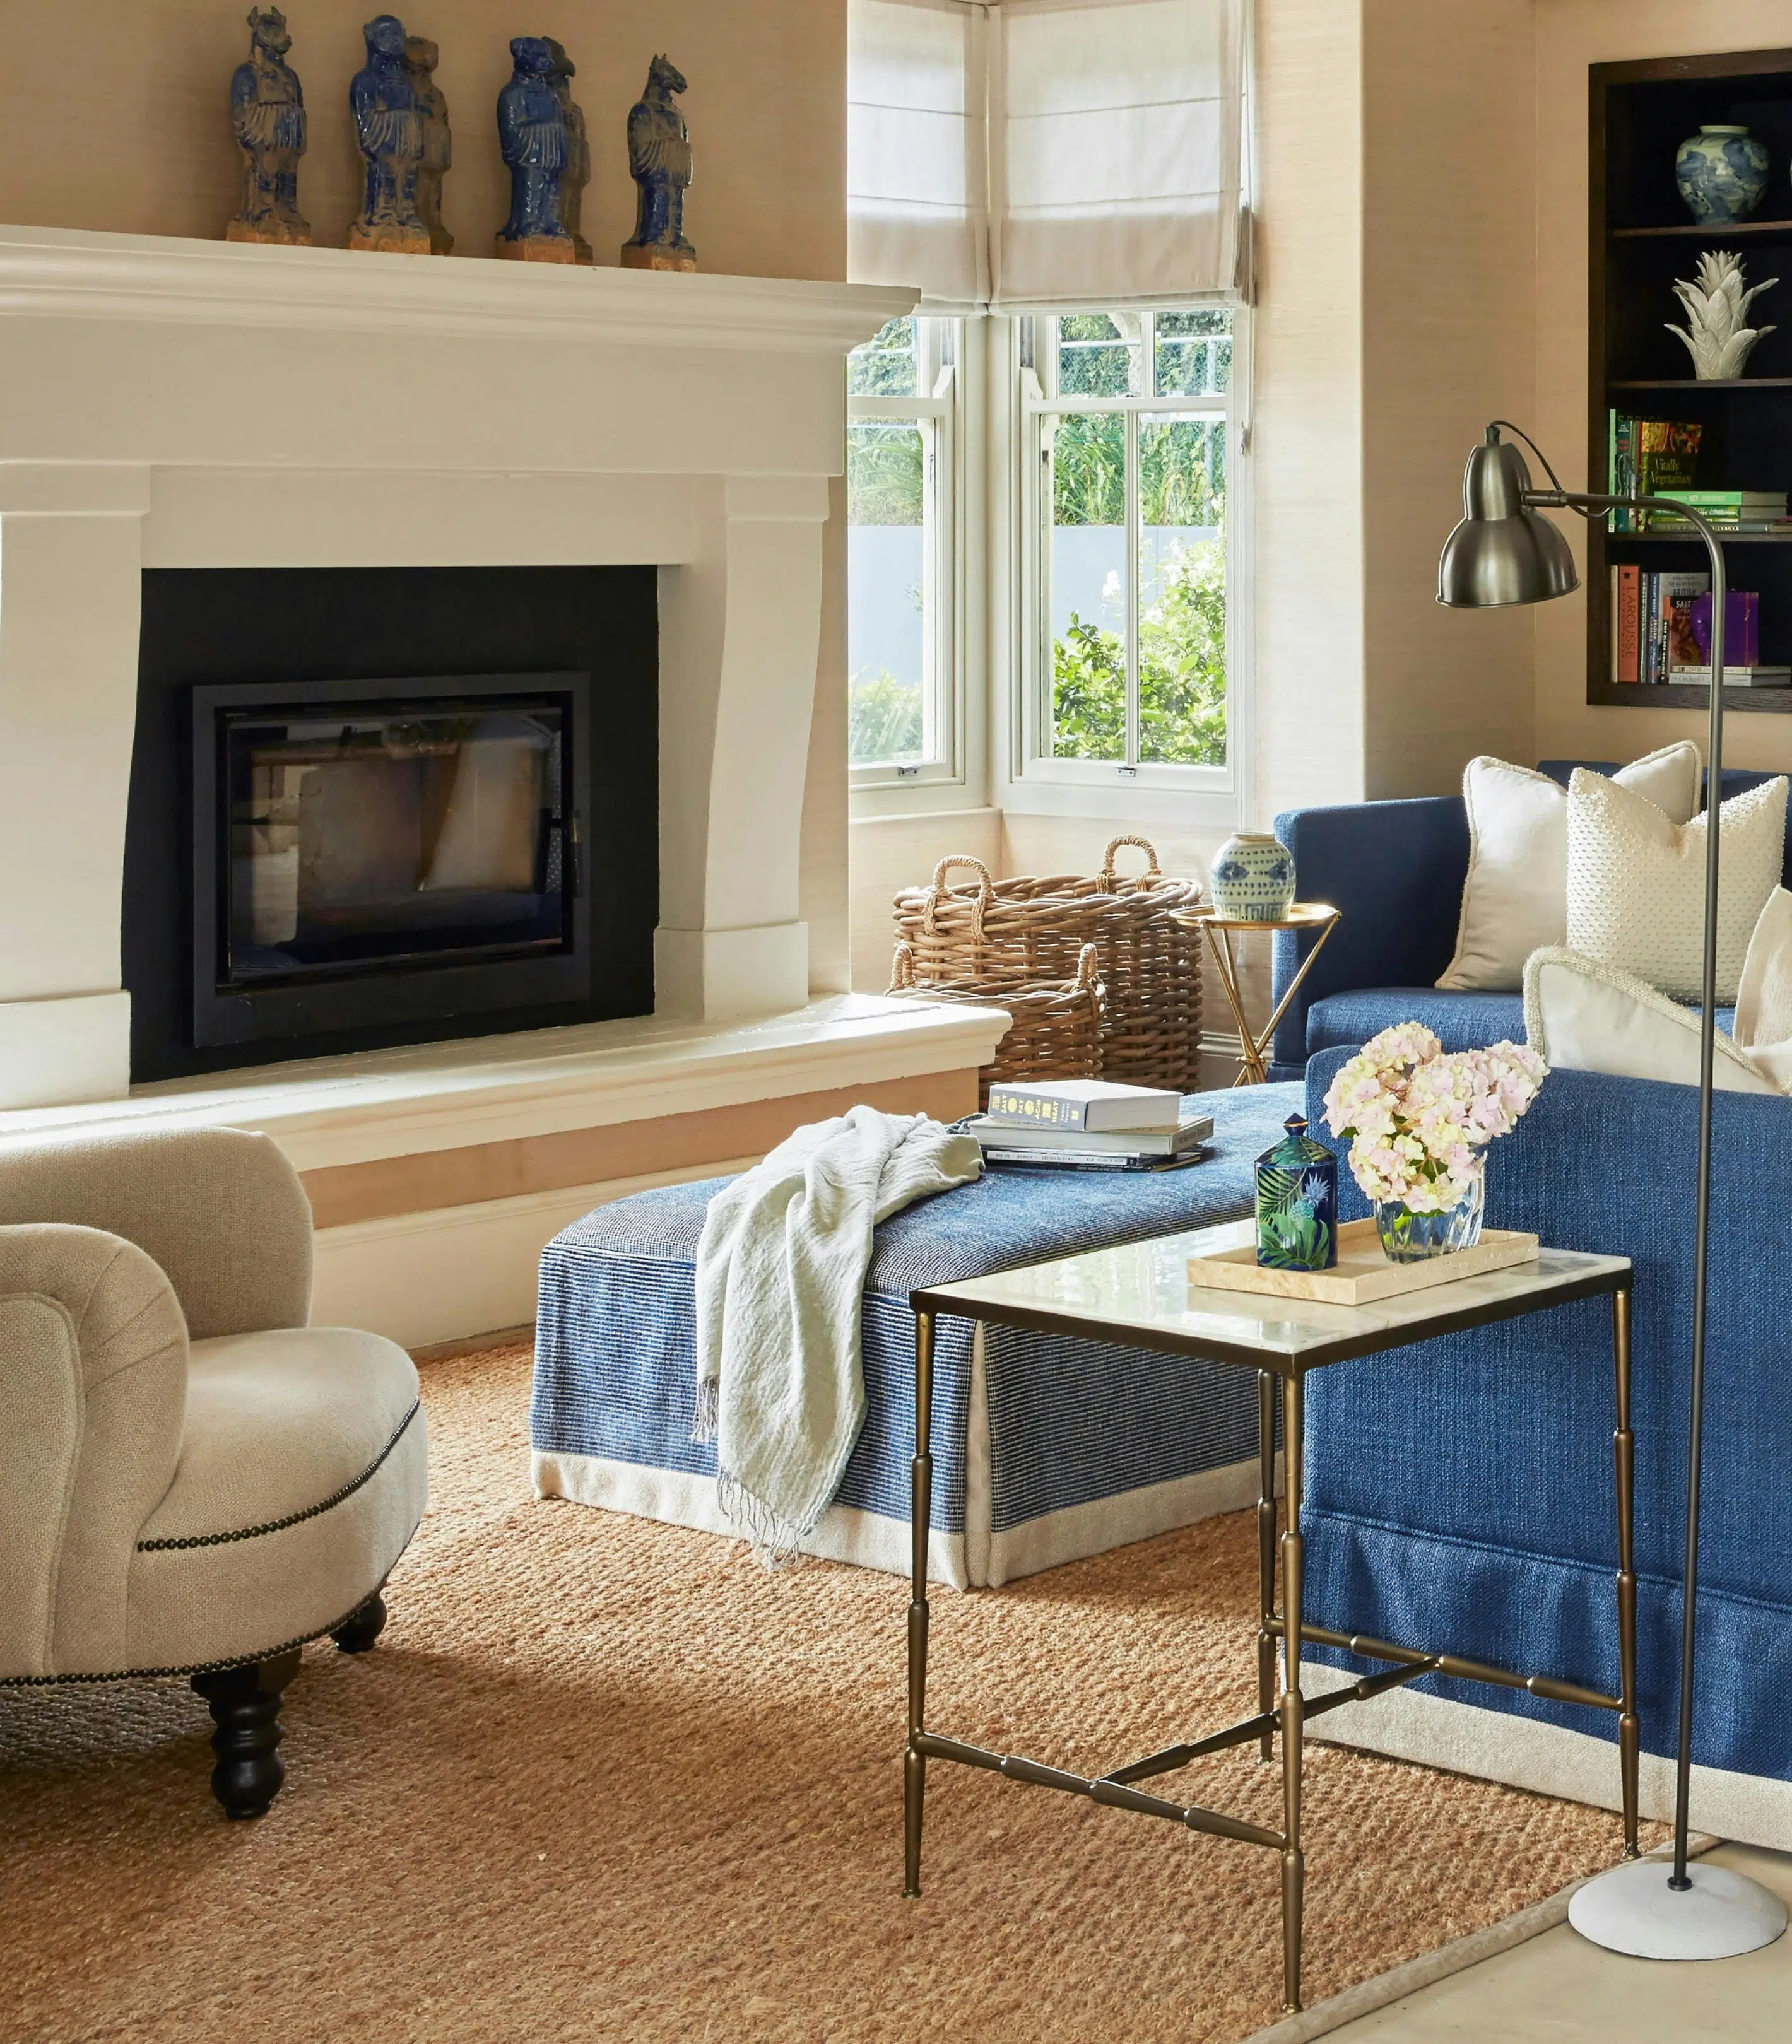 A living room is furnished in blues, creams and white, with chairs and an ottoman visible in front of a large fireplace with a mantlepiece holding blue ceramic figures.